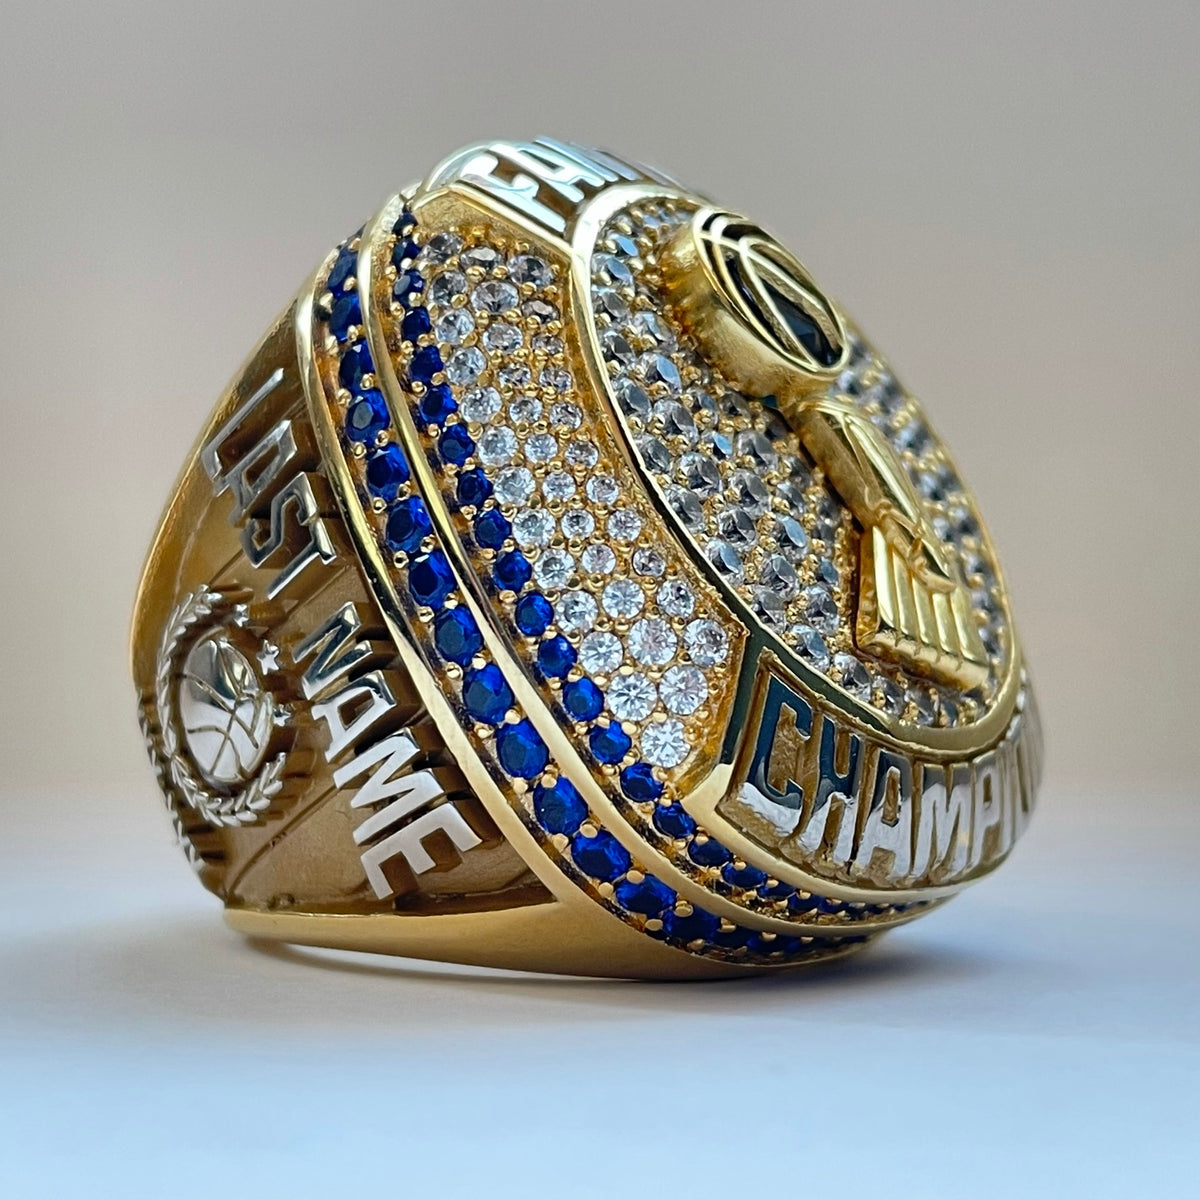 Balfour Archives - Page 4 of 8 - Buy and Sell Championship Rings